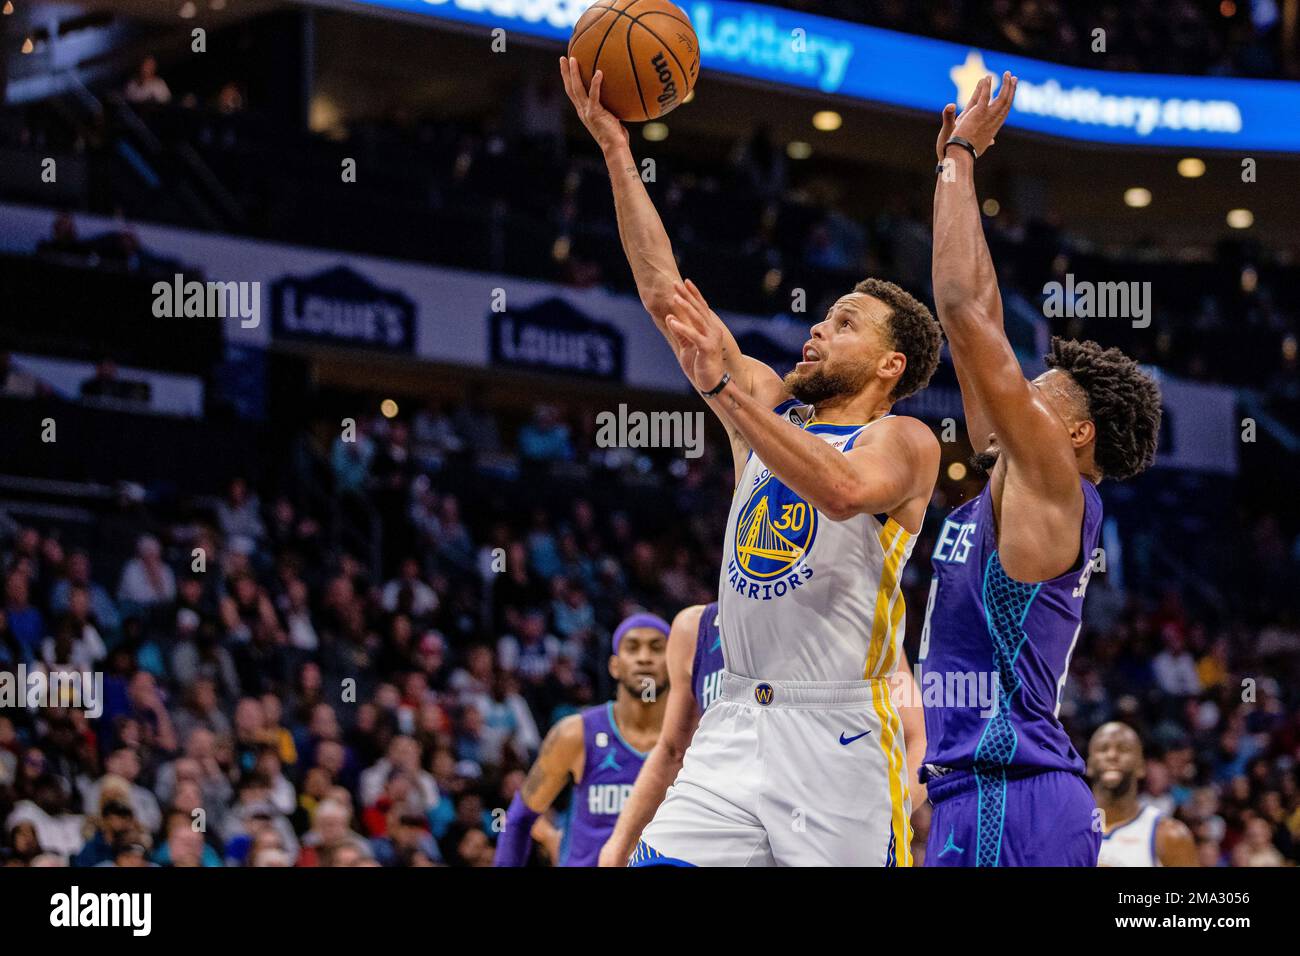 Download Steph Curry Going For Layup Wallpaper